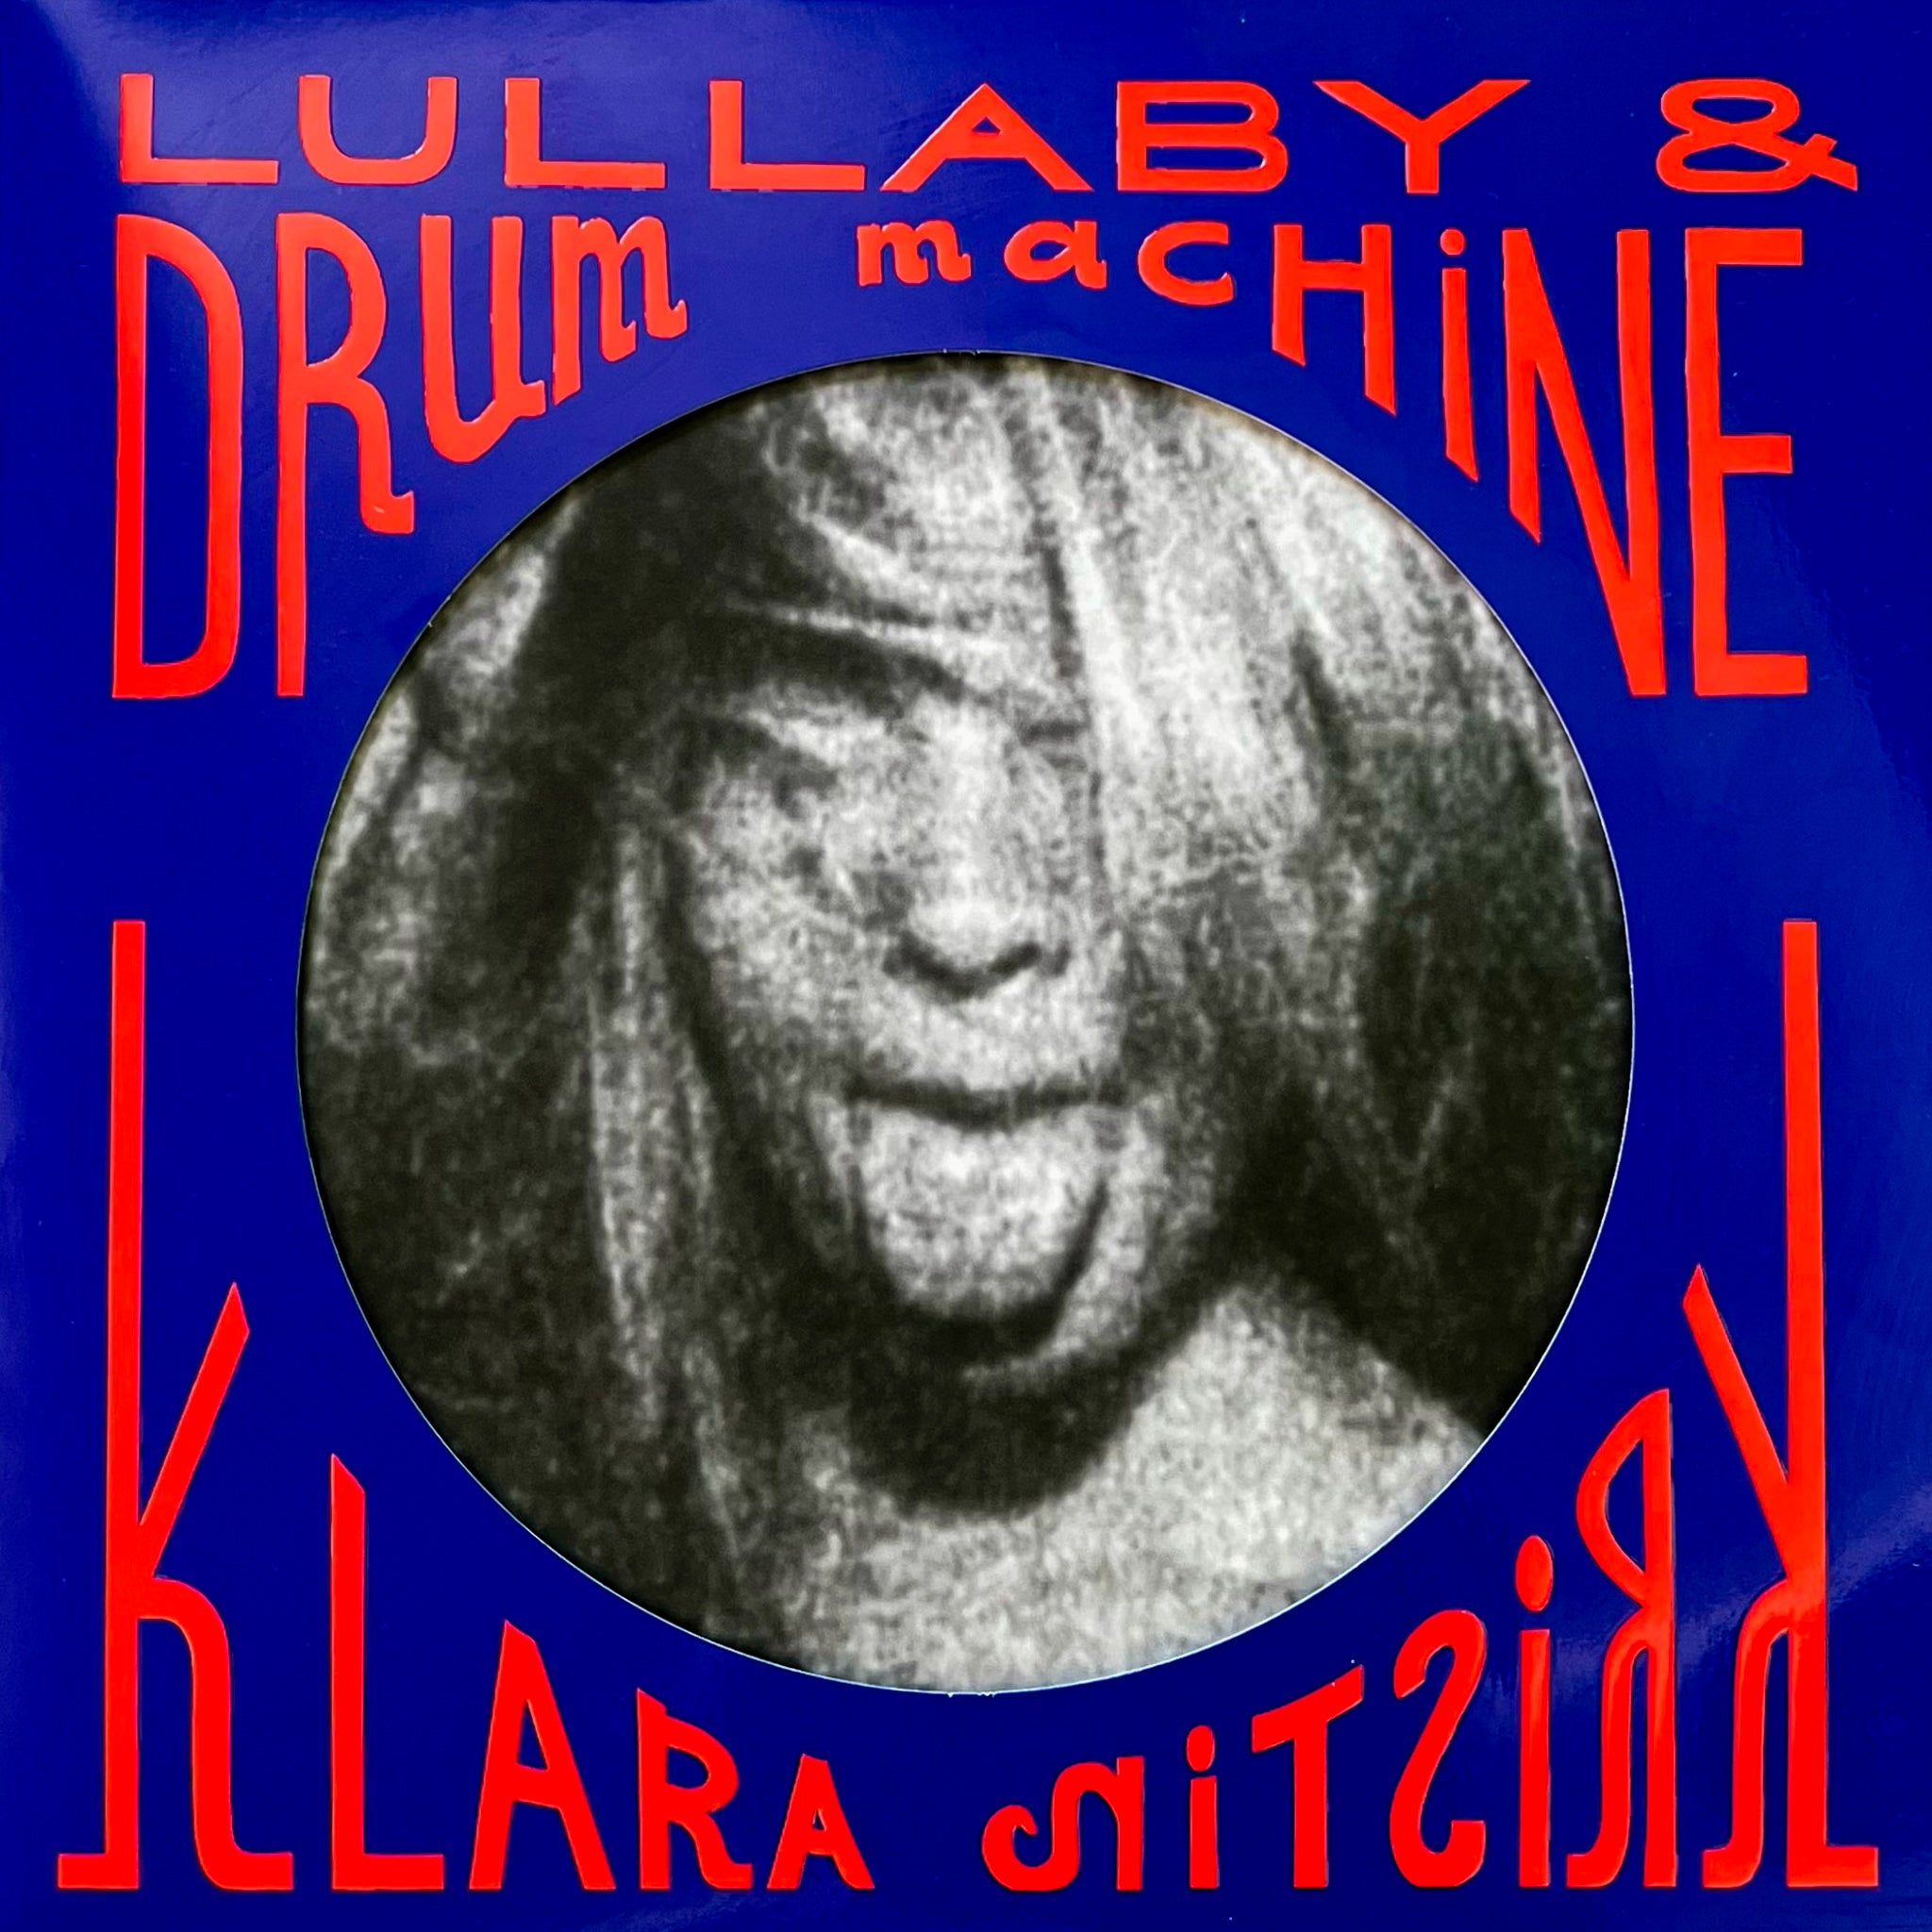 Reprint of Lullaby & Drum Machine Album in Blue & Red colours